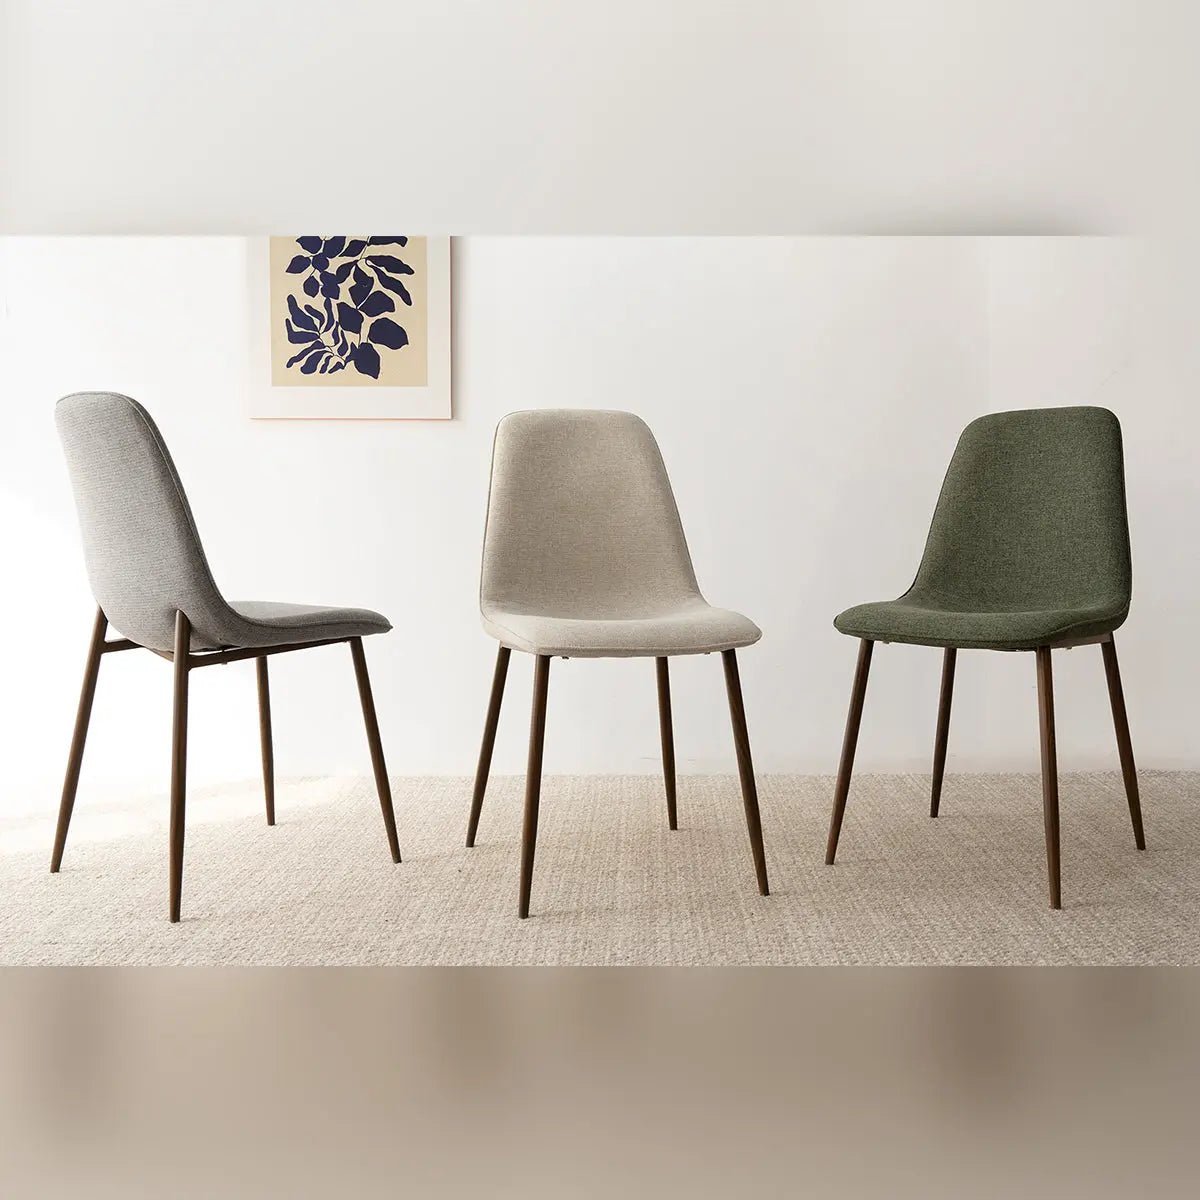 Oslo Dining Chairs with Walnut Legs, Modern Dining Chairs Set of 4 The Pop Maison